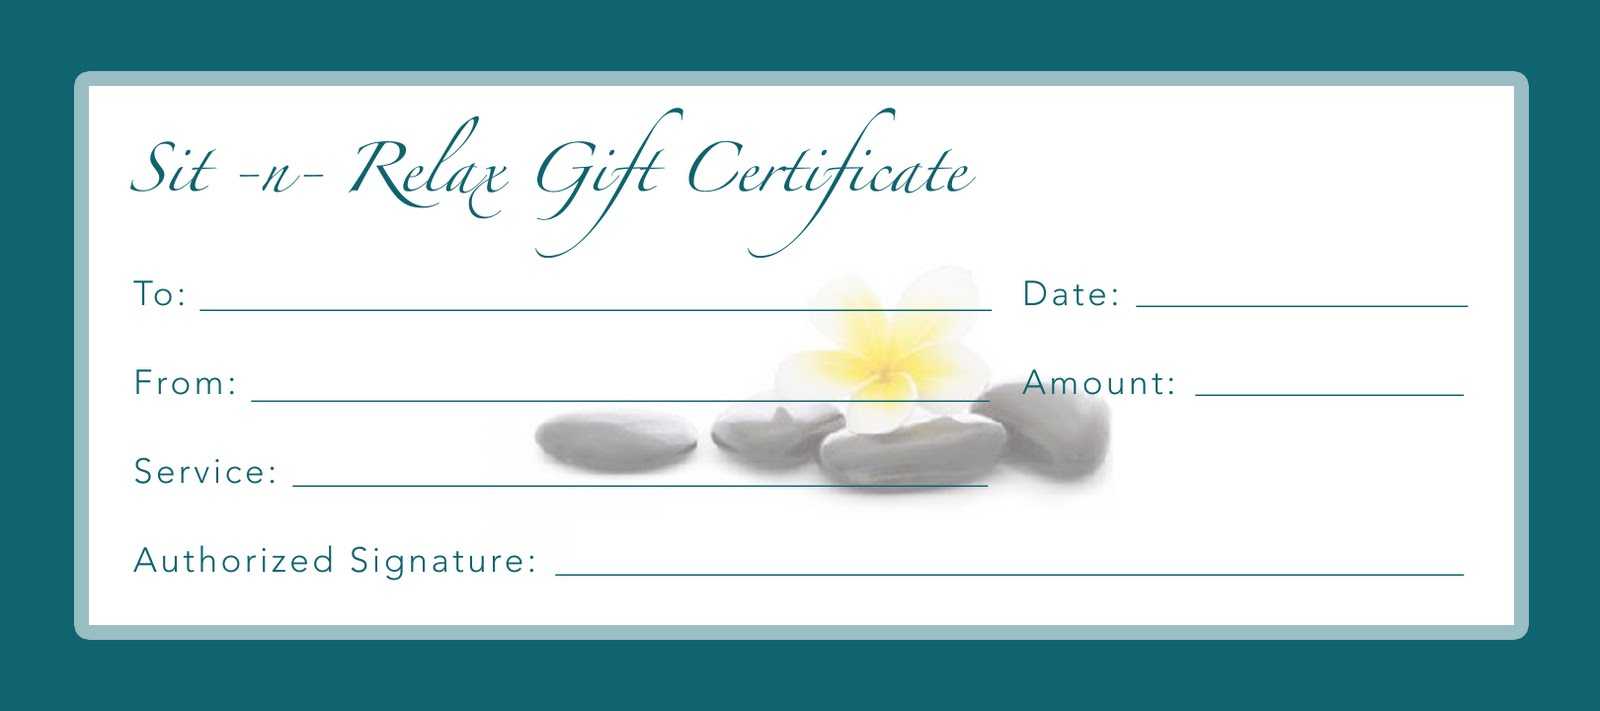 Free Spa Gift Certificate Template Printable Throughout Massage Gift Certificate Template Free Download